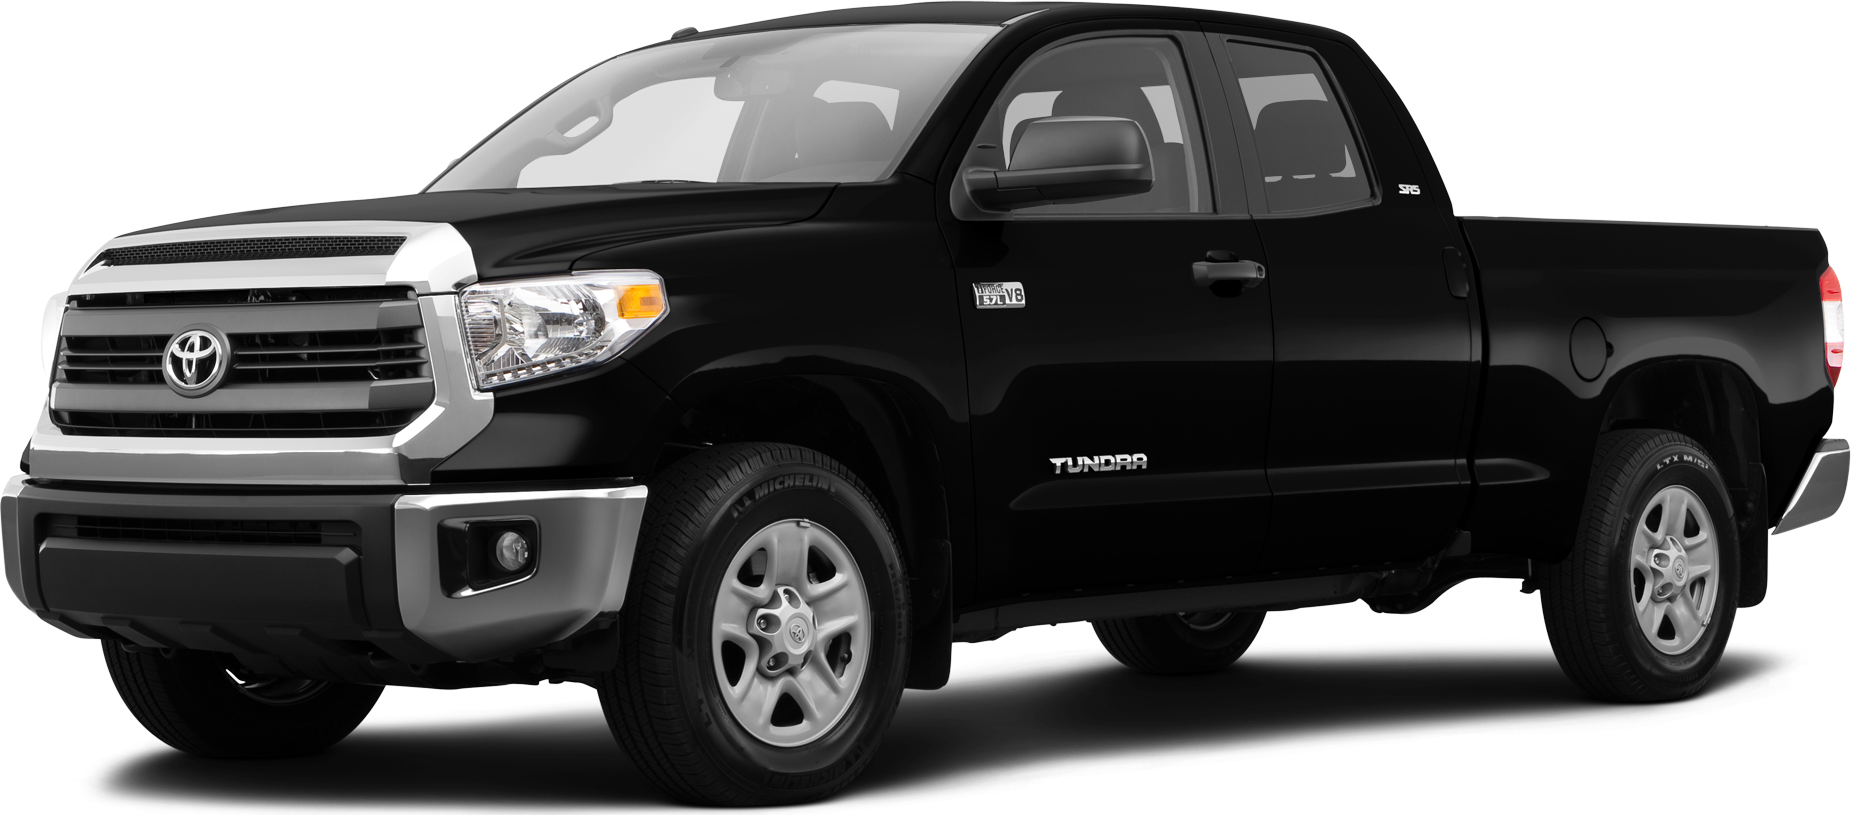 2014 Toyota Tundra Double Cab Specs and Features | Kelley Blue Book